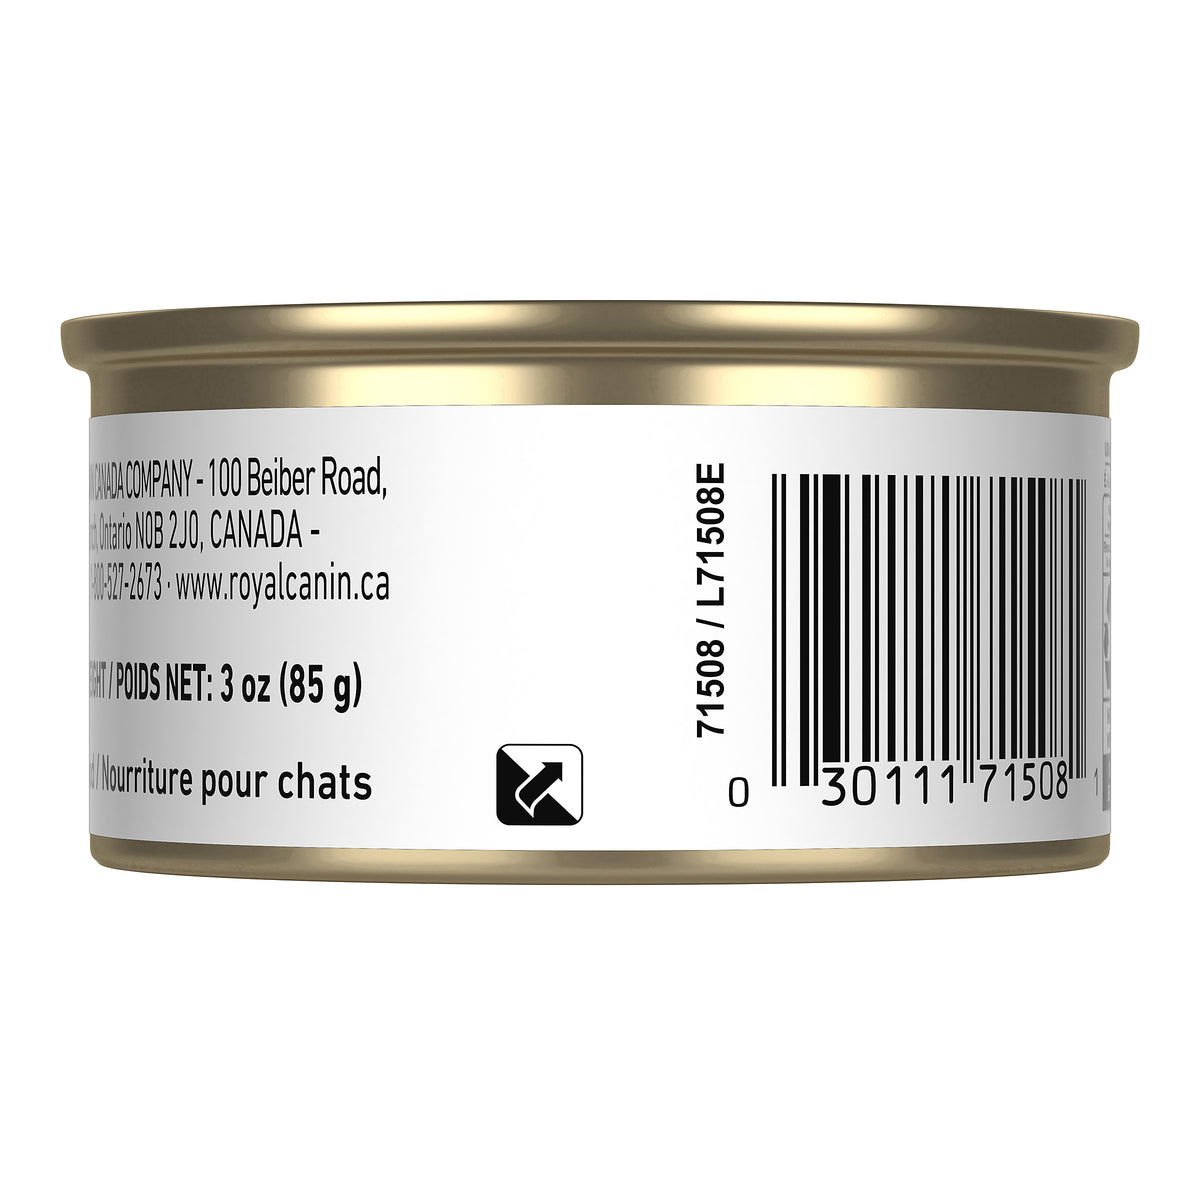 Royal Canin Kitten (Thin Slices in Gravy) - Wet Canned cat food